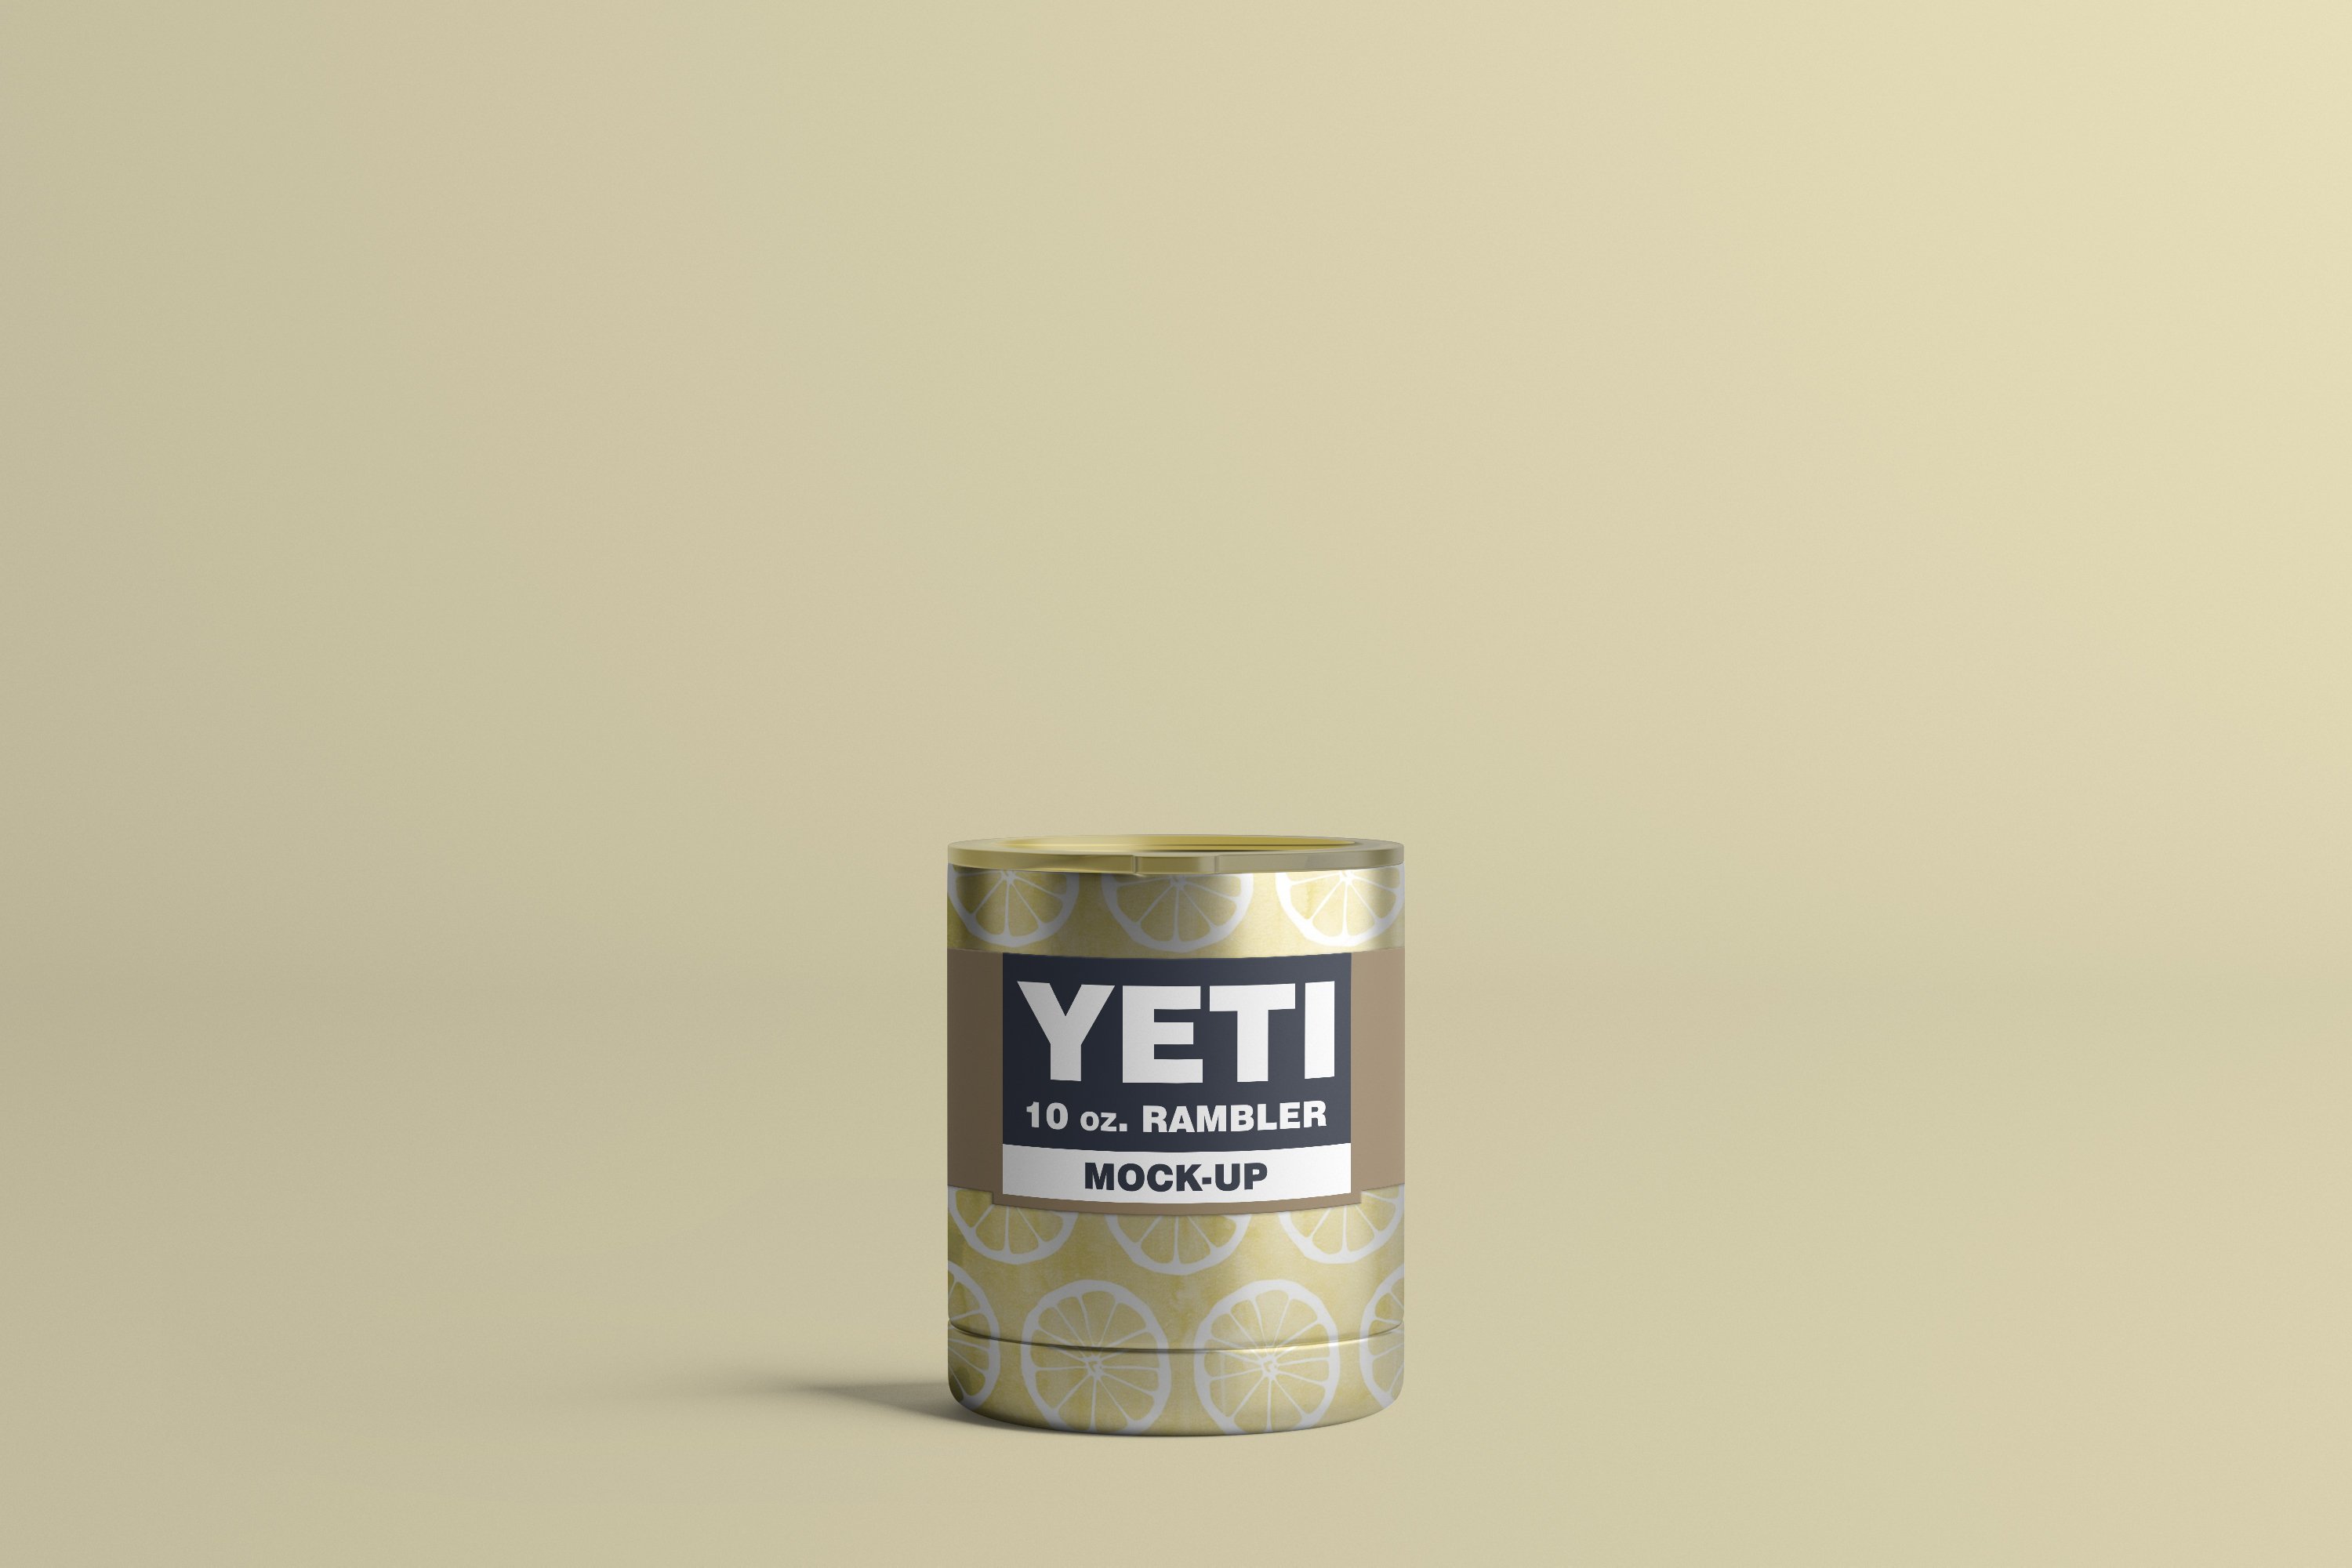 Gold yeti cup with lemon illustrations.